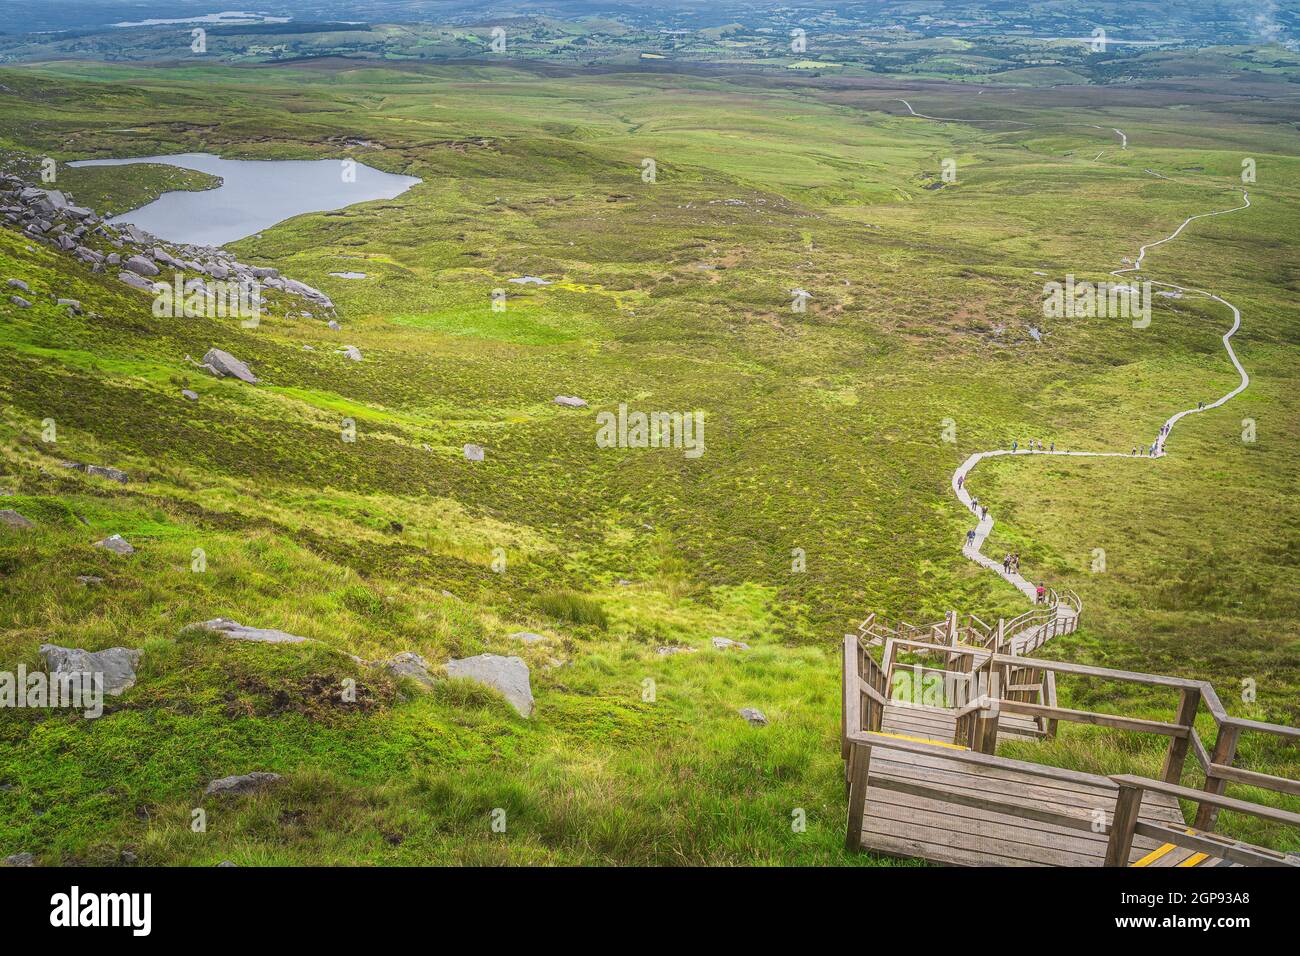 People climbing on steep steps and stairs of wooden boardwalk, to reach Cuilcagh Mountain peak with view on lake and valley below, Northern Ireland Stock Photo